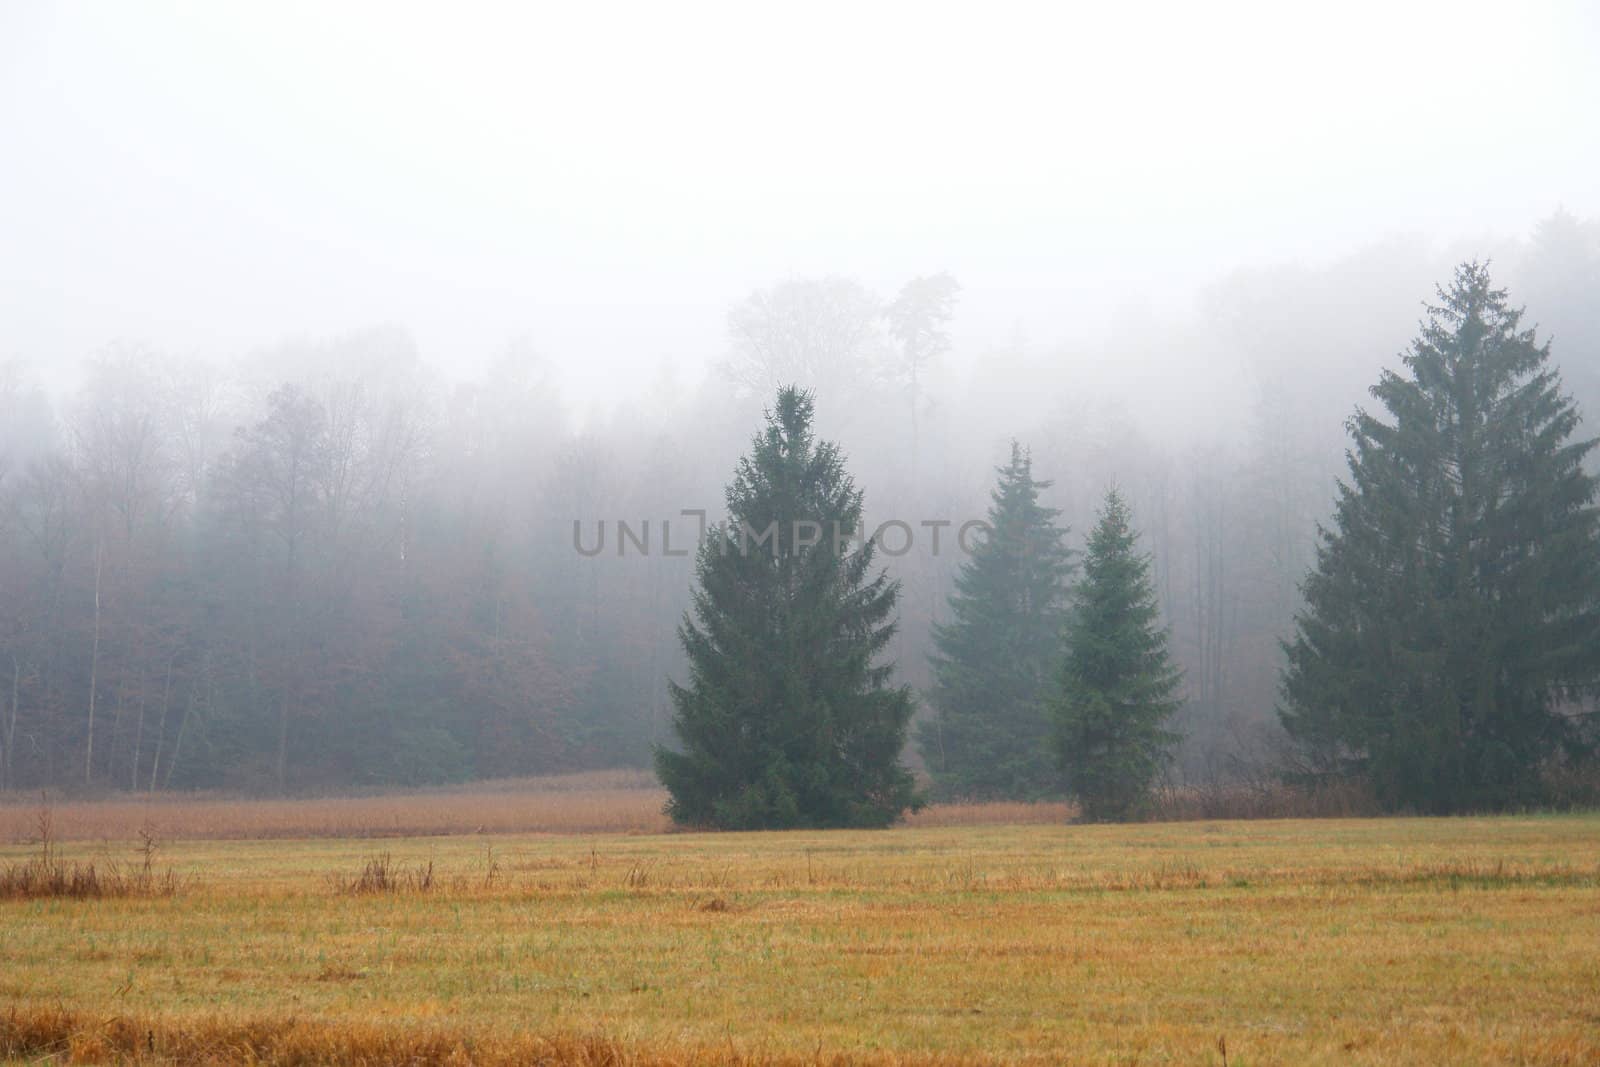 An early morning foggy view of this field with trees An early morning foggy view of this field with trees